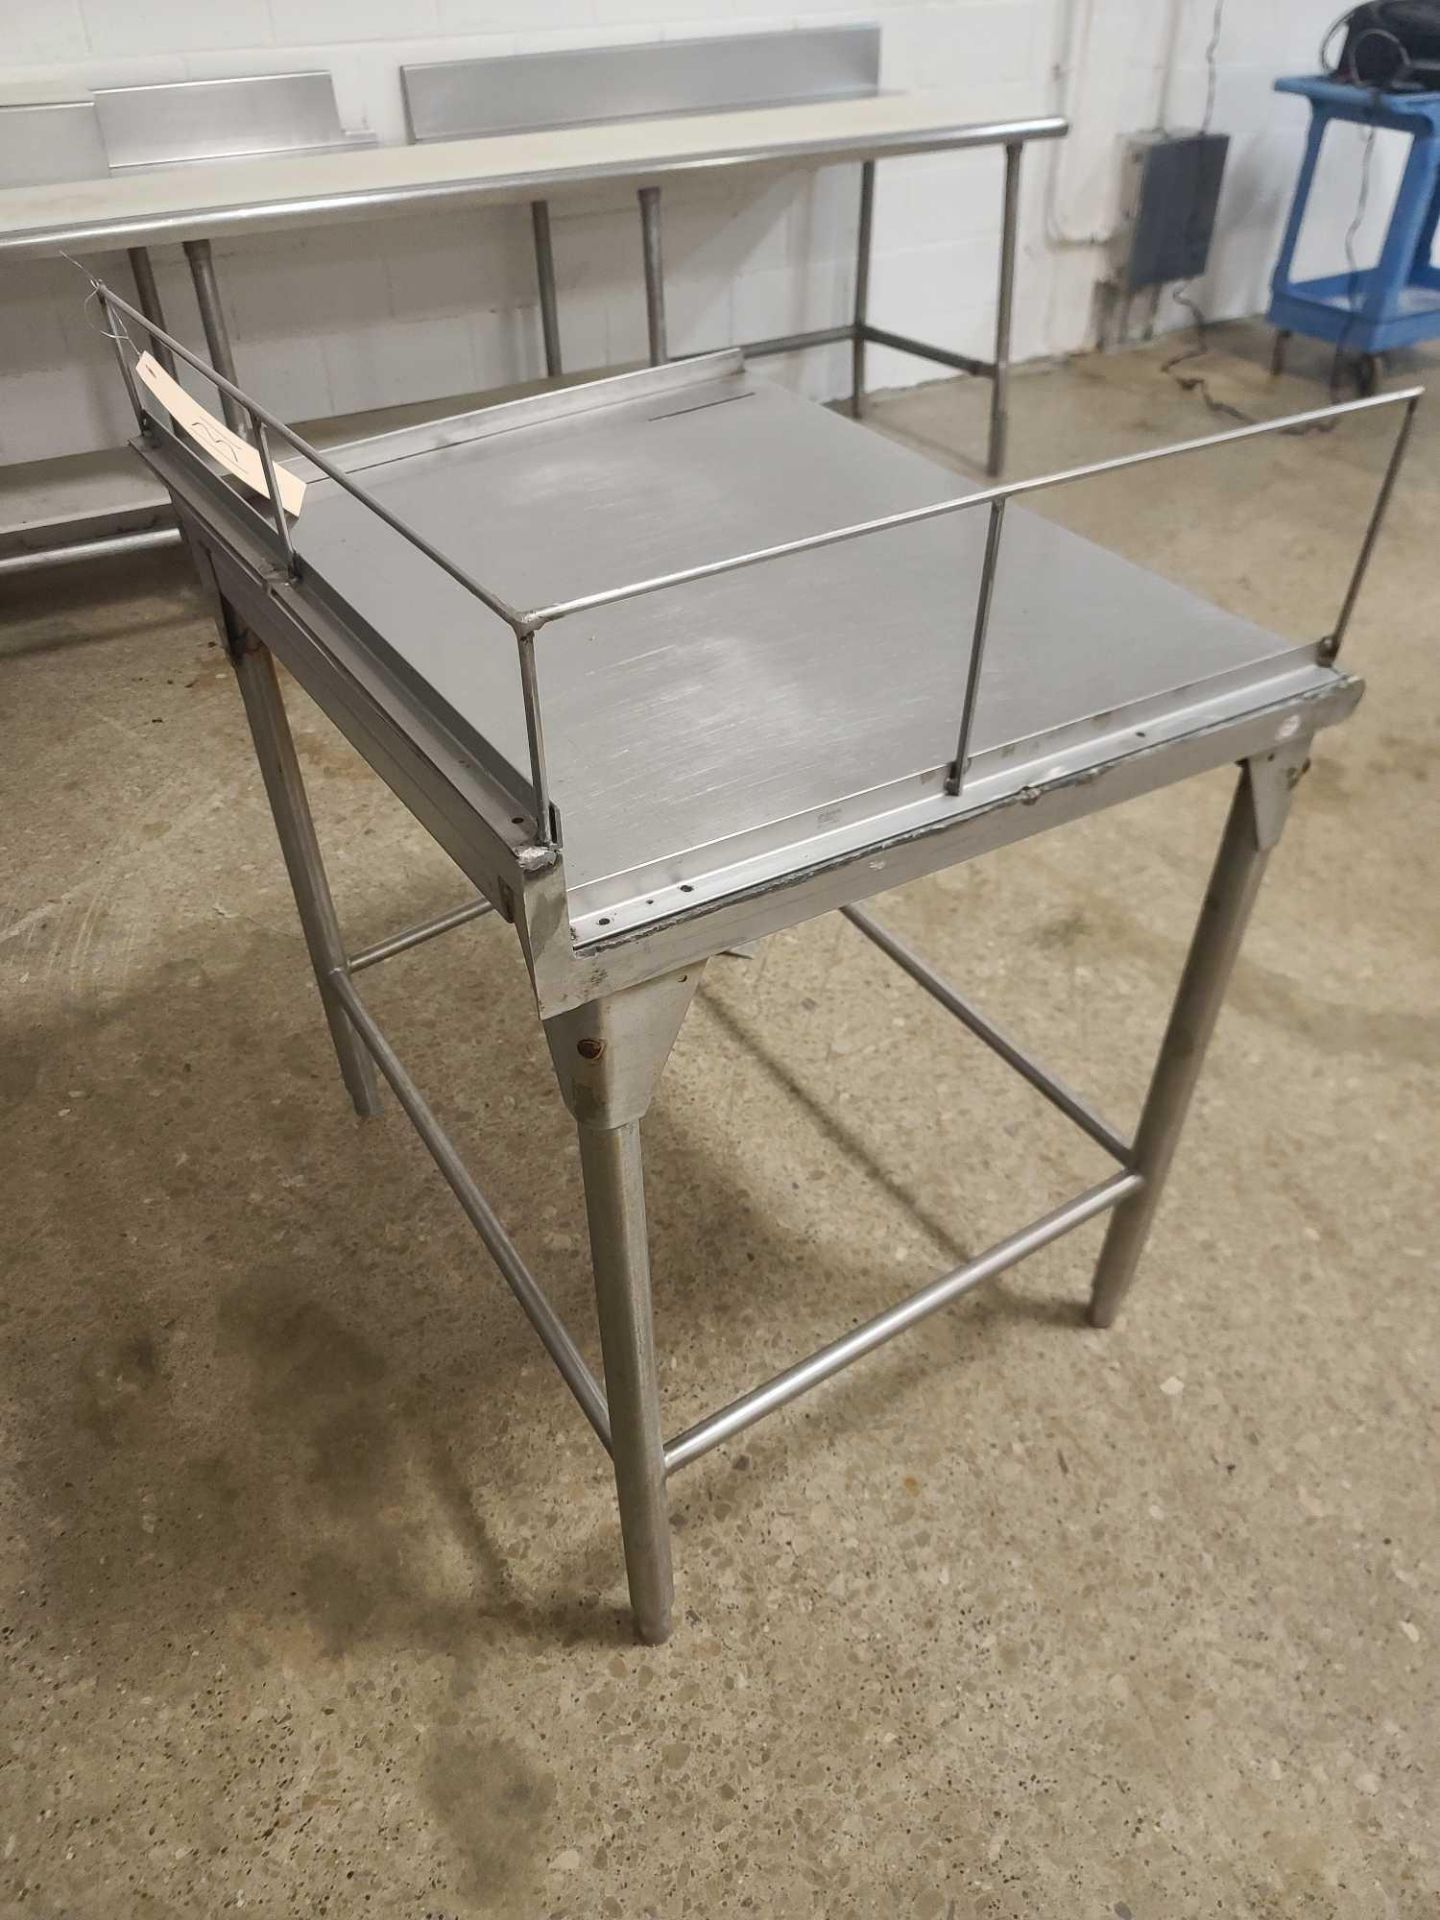 Five Stainless Steel Tables - Image 4 of 11